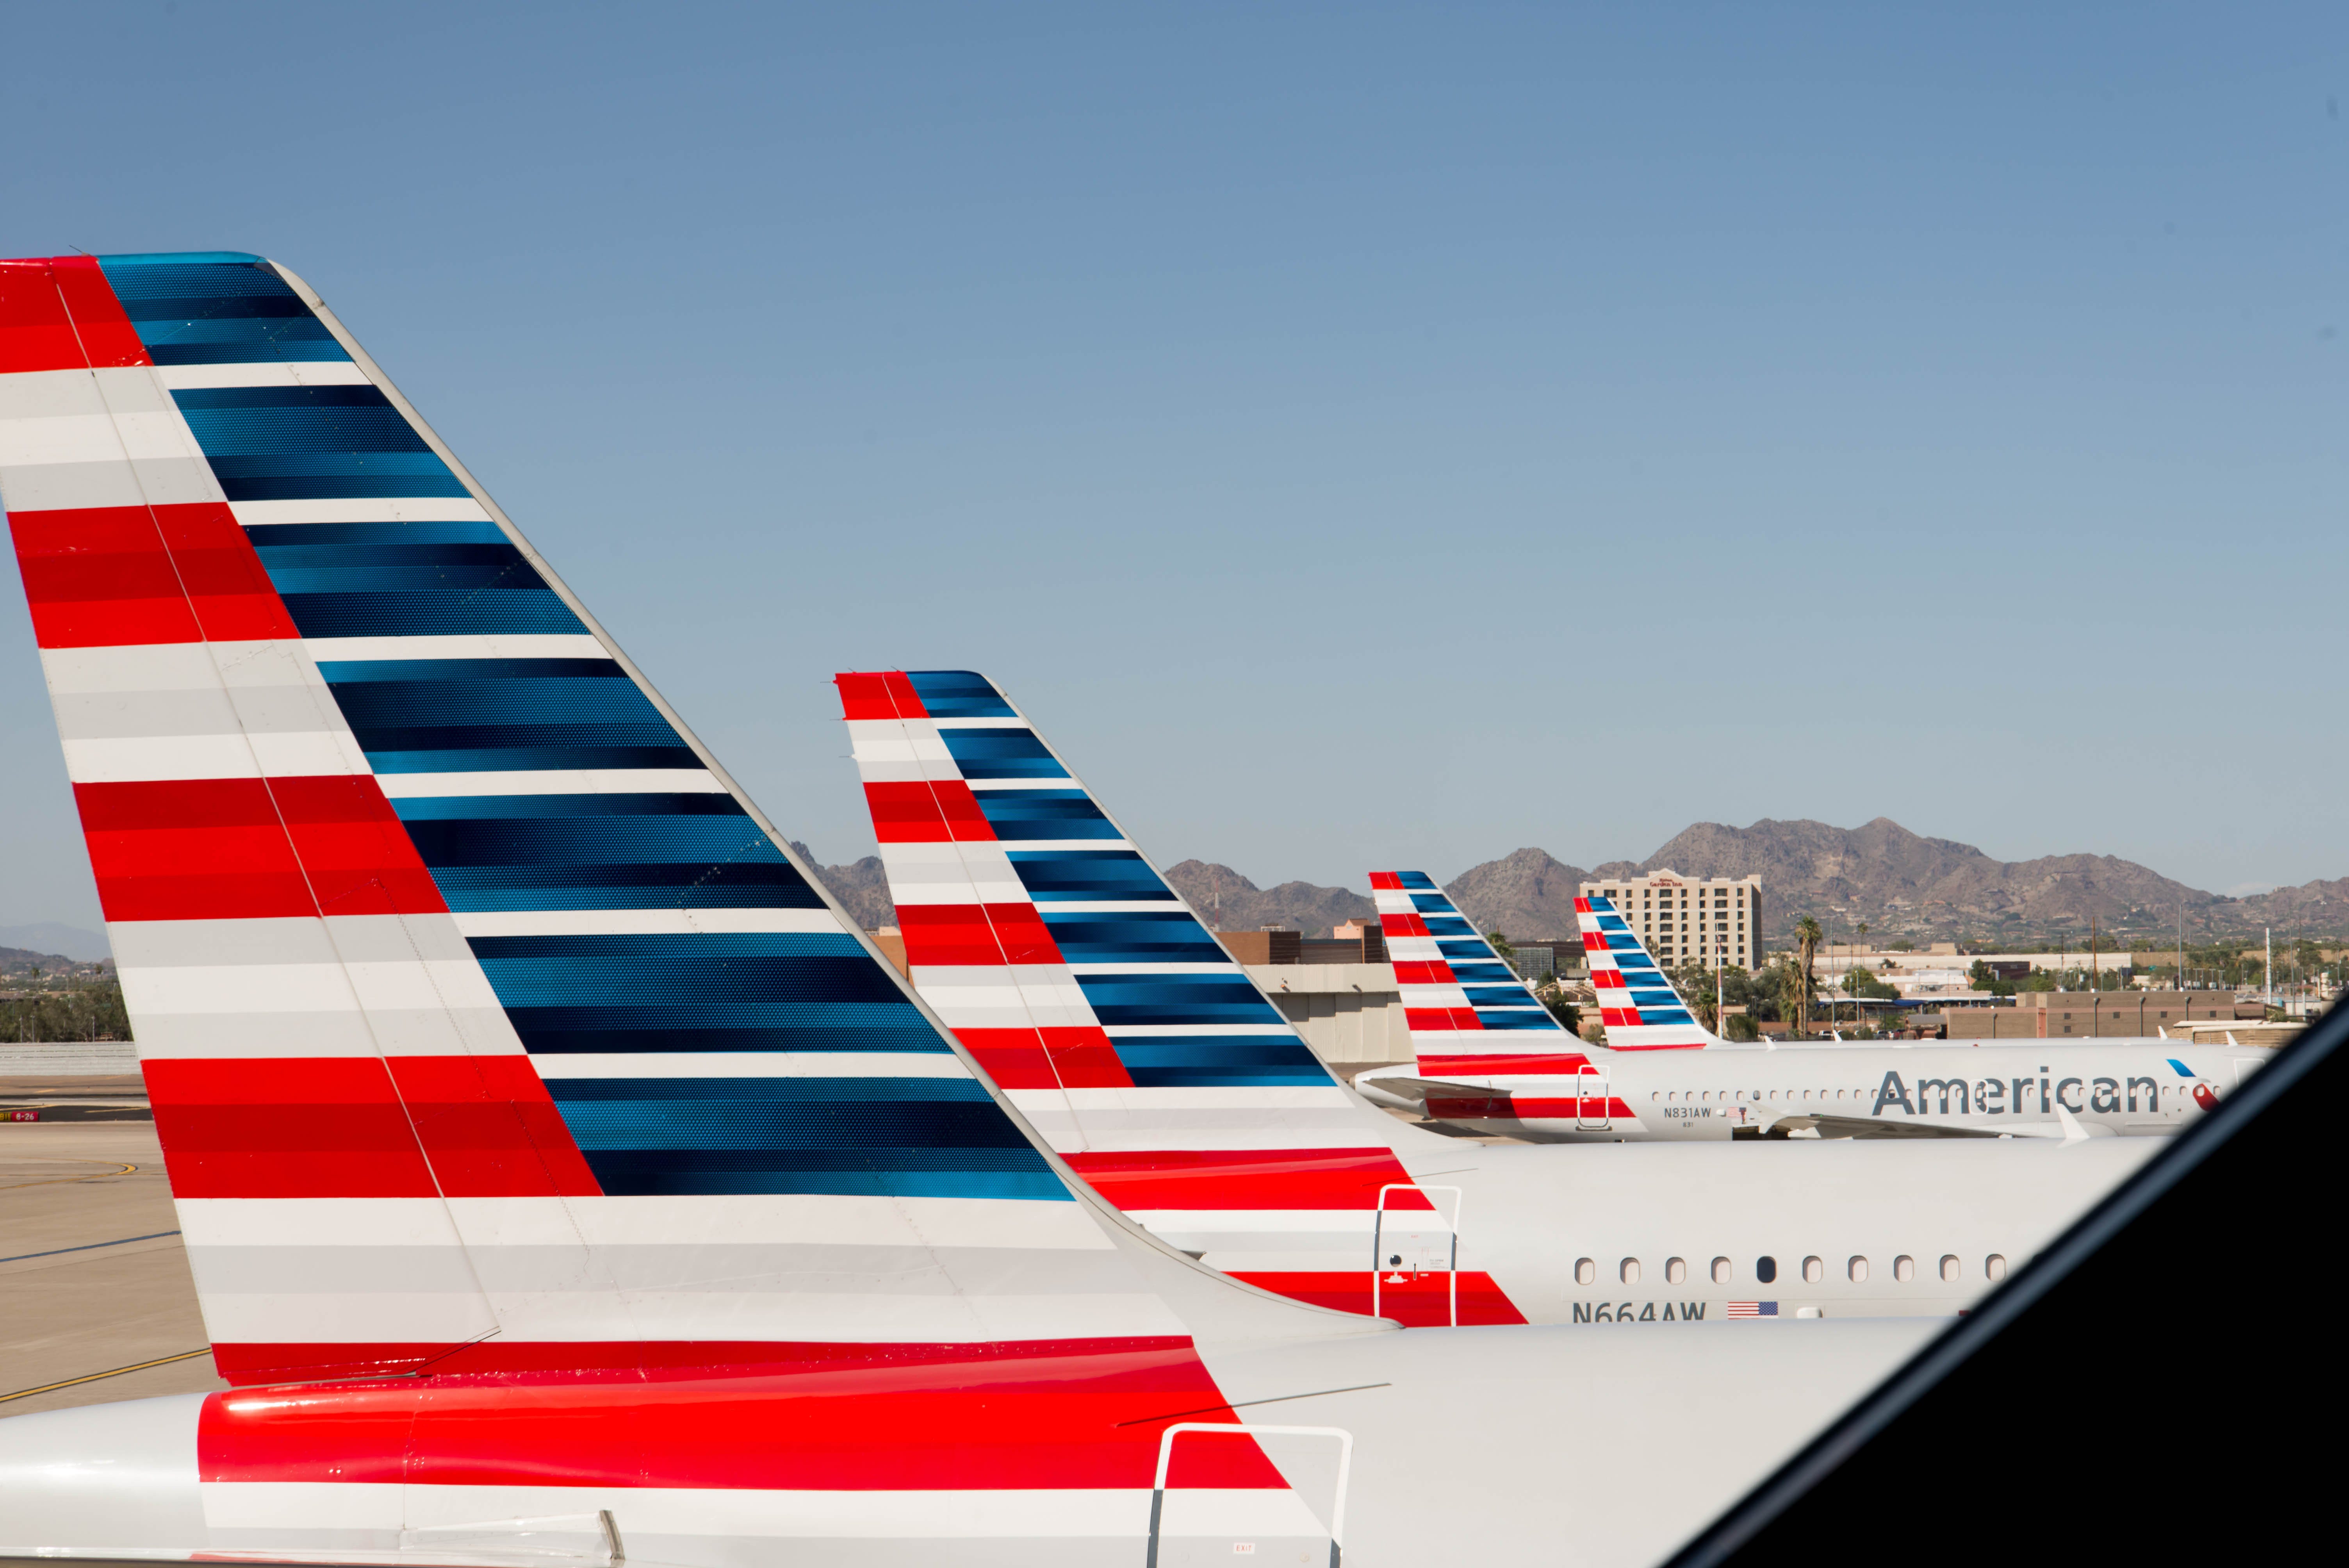 American Airlines Stock Retreats After Q3 Earnings Beat: Here's What's Going On